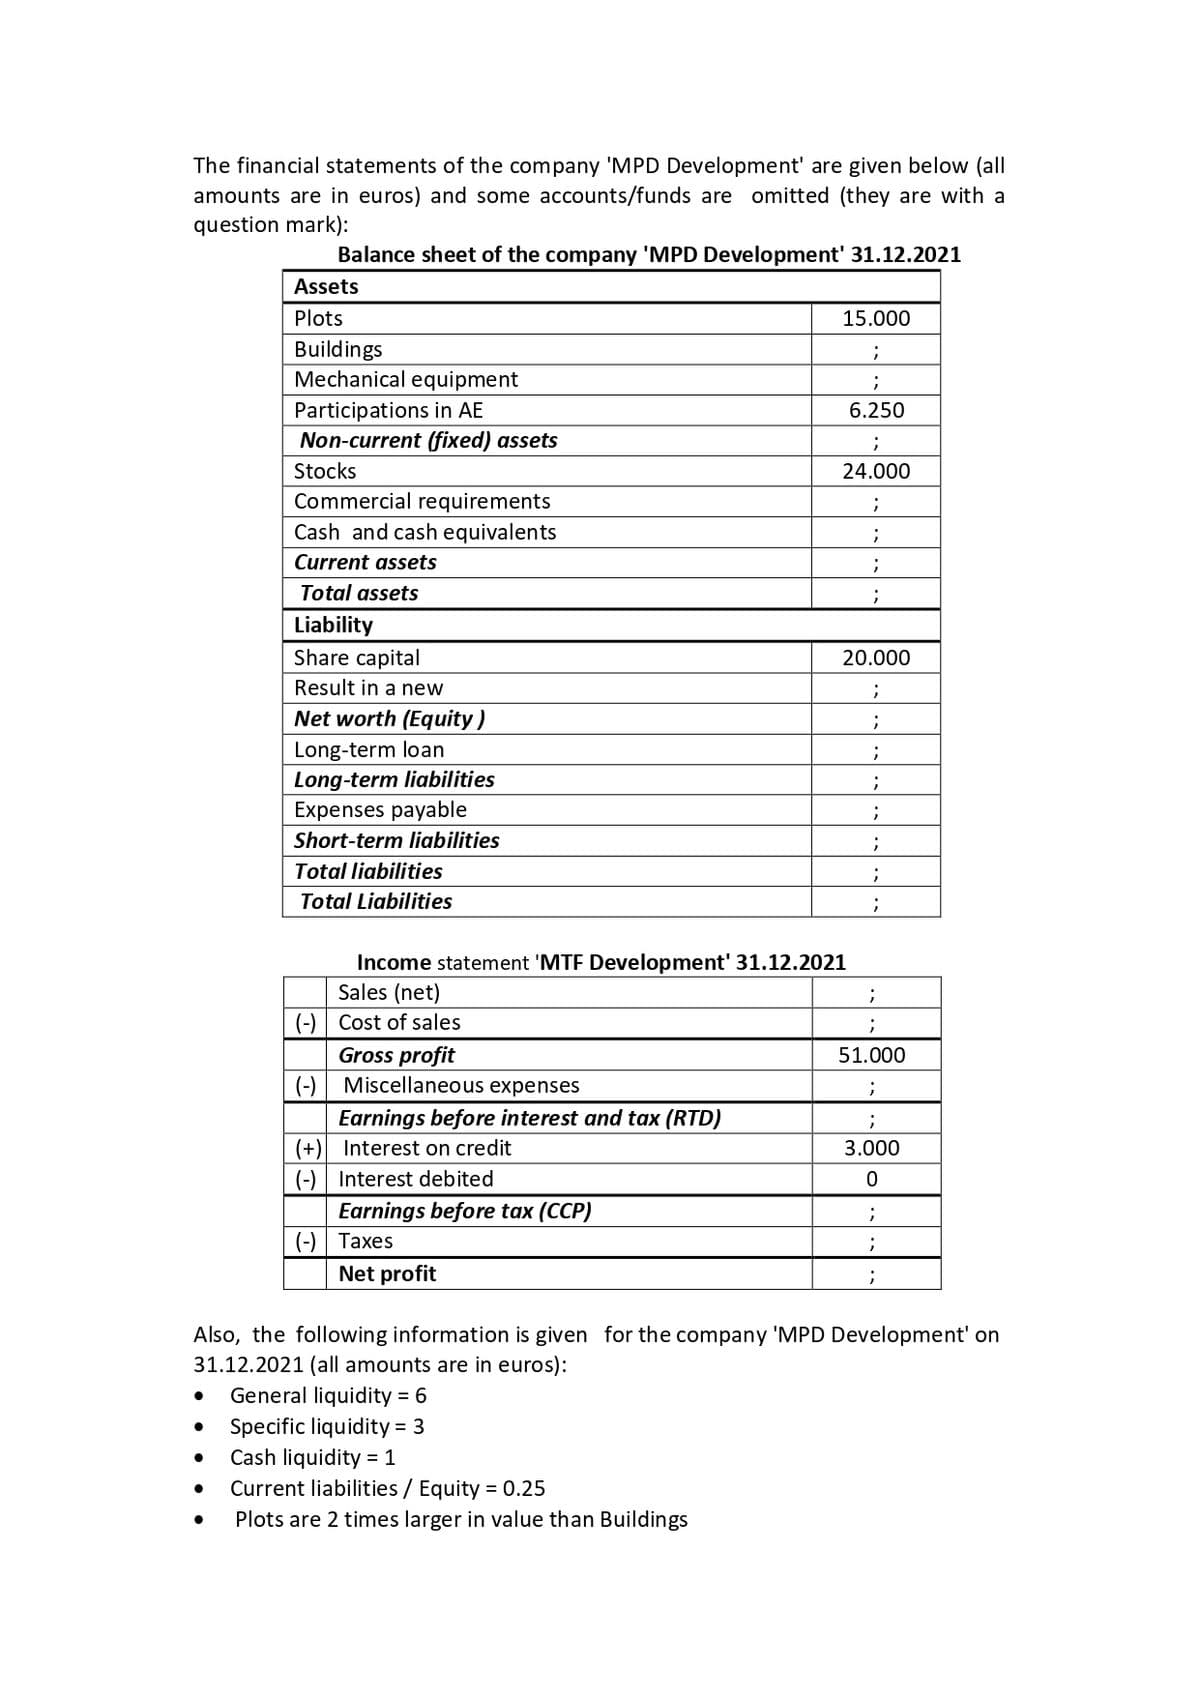 The financial statements of the company 'MPD Development' are given below (all
amounts are in euros) and some accounts/funds are omitted (they are with a
question mark):
Balance sheet of the company 'MPD Development' 31.12.2021
Assets
Plots
●
Buildings
Mechanical equipment
Participations in AE
Non-current (fixed) assets
Stocks
Commercial requirements
Cash and cash equivalents
Current assets
Total assets
Liability
Share capital
Result in a new
Net worth (Equity)
Long-term loan
Long-term liabilities
Expenses payable
Short-term liabilities
Total liabilities
Total Liabilities
Earnings before interest and tax (RTD)
(+) Interest on credit
(-)
Interest debited
Earnings before tax (CCP)
Income statement 'MTF Development' 31.12.2021
Sales (net)
(-) Cost of sales
Gross profit
(-) Miscellaneous expenses
(-) Taxes
Net profit
15.000
;
;
6.250
;
24.000
Current liabilities / Equity = 0.25
Plots are 2 times larger in value than Buildings
;
;
;
;
20.000
;
;
;
;
;
;
;
;
;
51.000
;
;
3.000
0
;
;
Also, the following information is given for the company 'MPD Development' on
31.12.2021 (all amounts are in euros):
General liquidity = 6
Specific liquidity = 3
Cash liquidity = 1
;